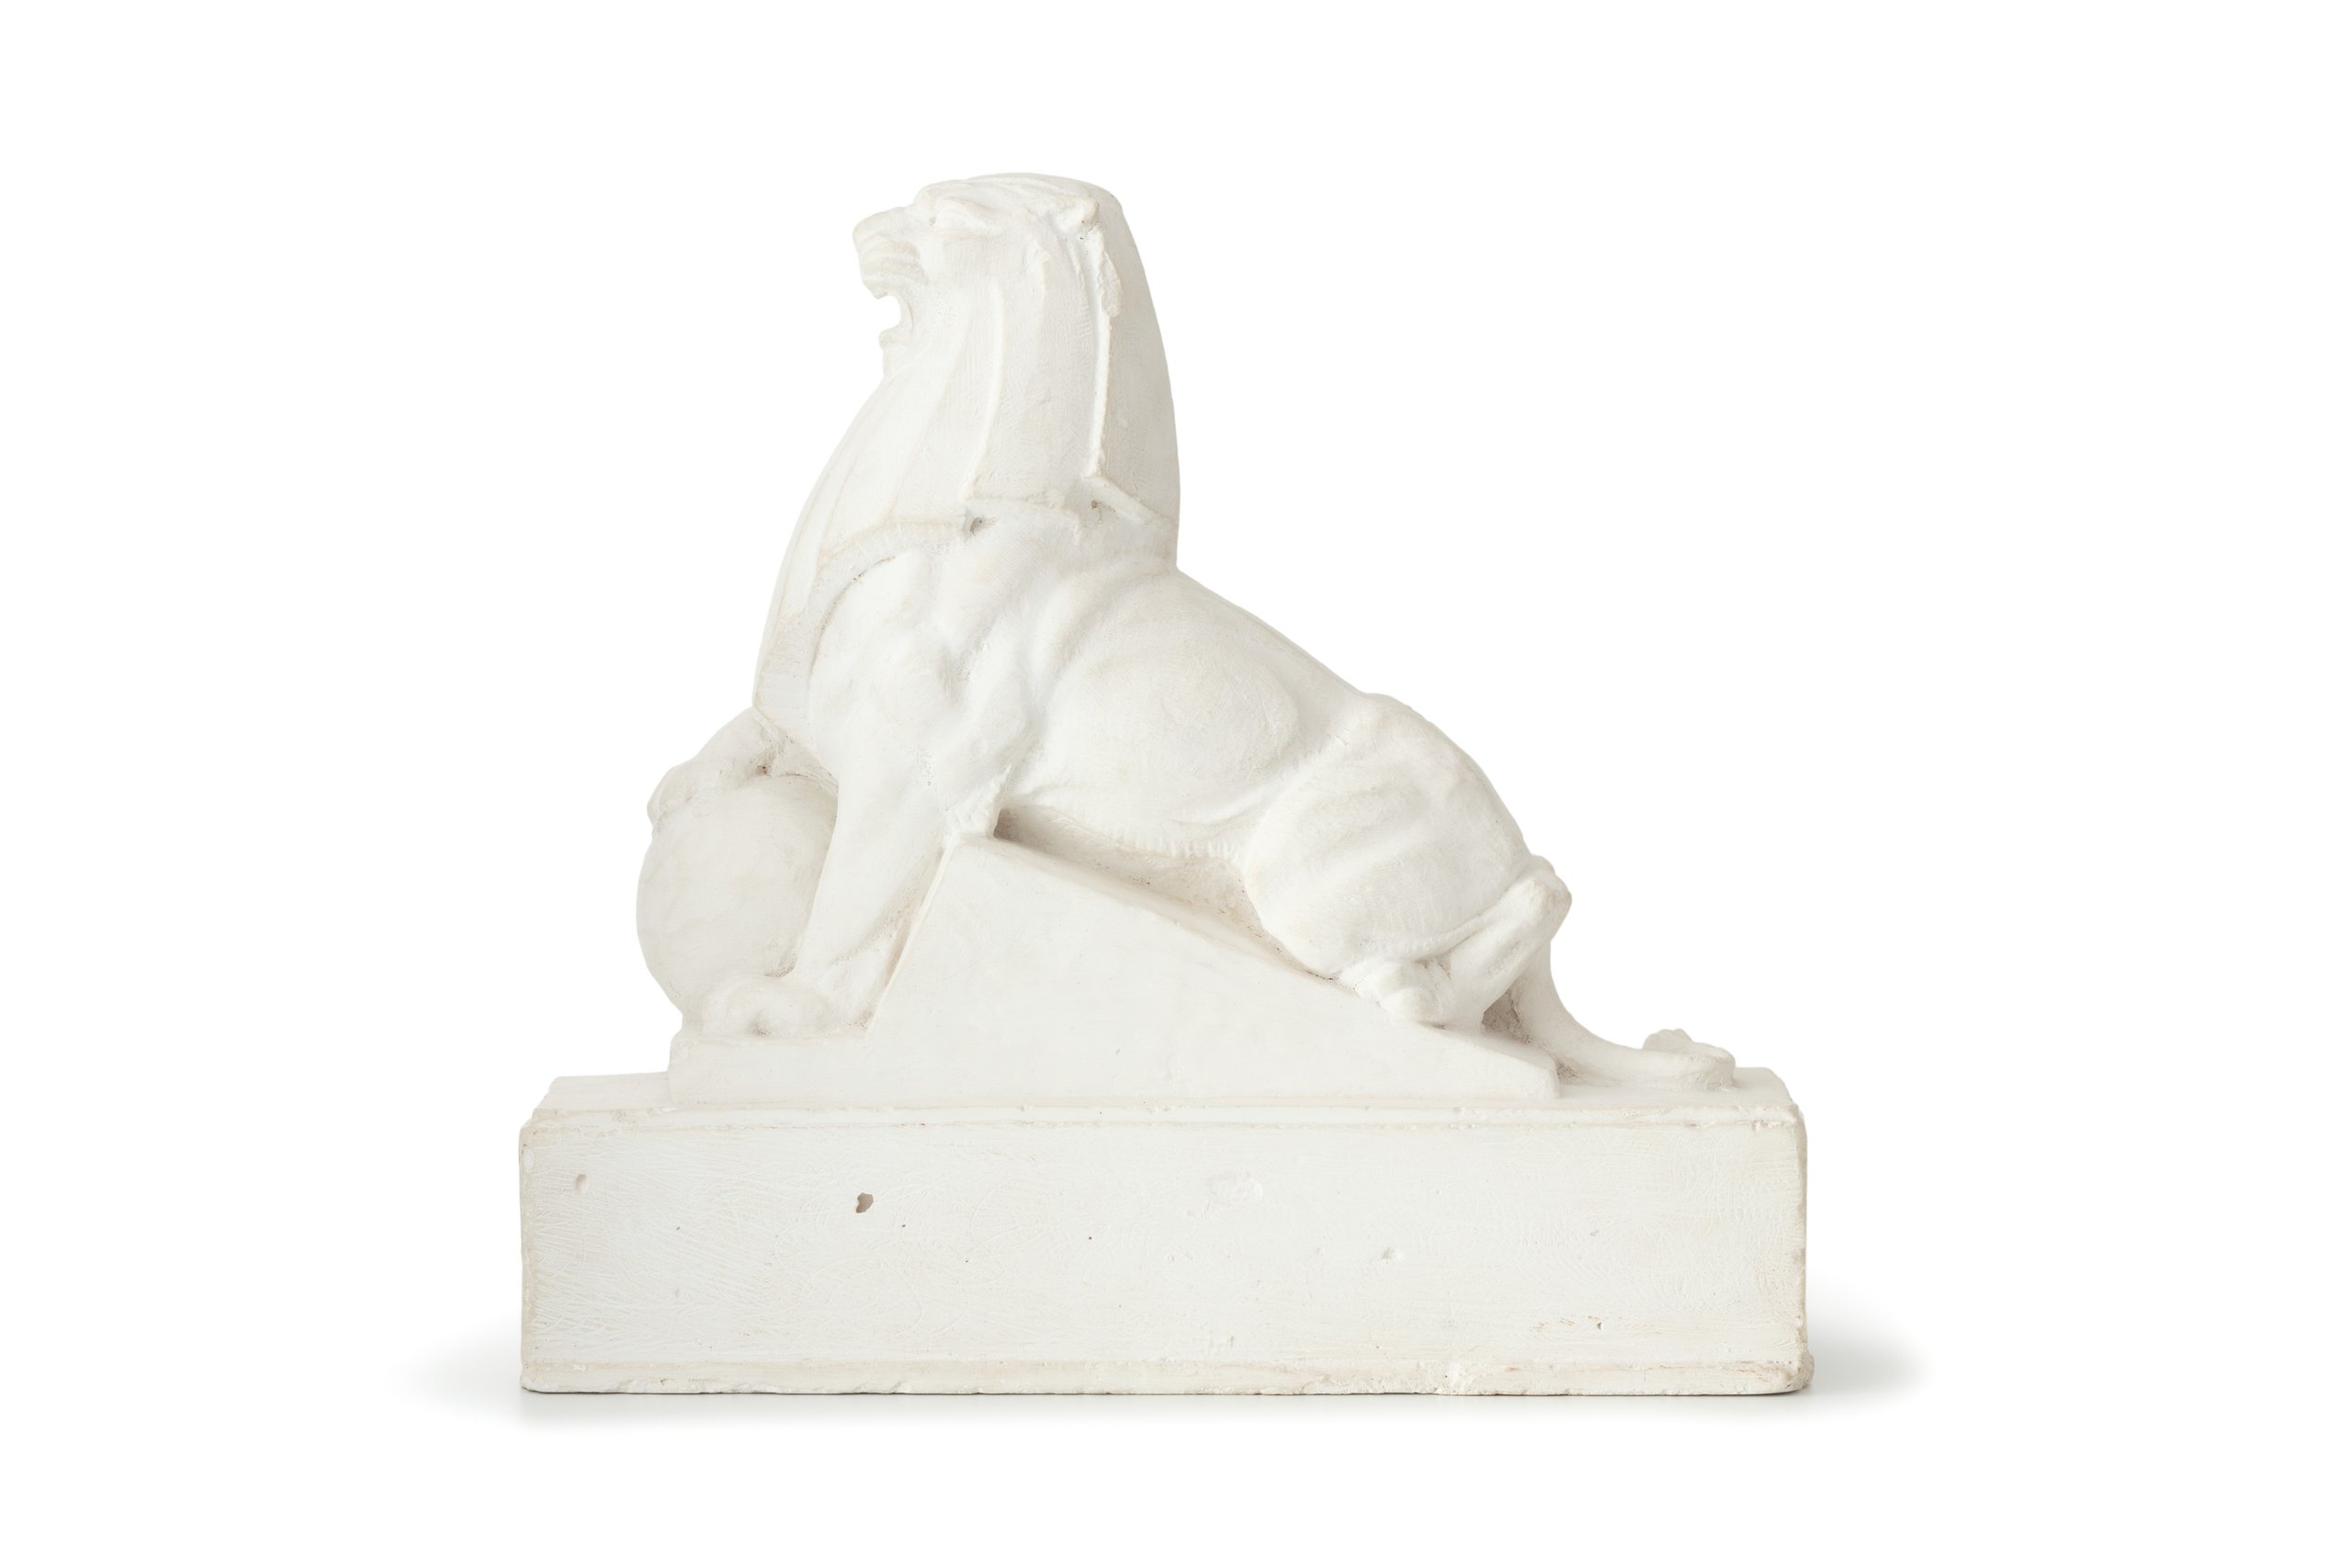 Plaster macquette of Holden lion by Rayner Hoff